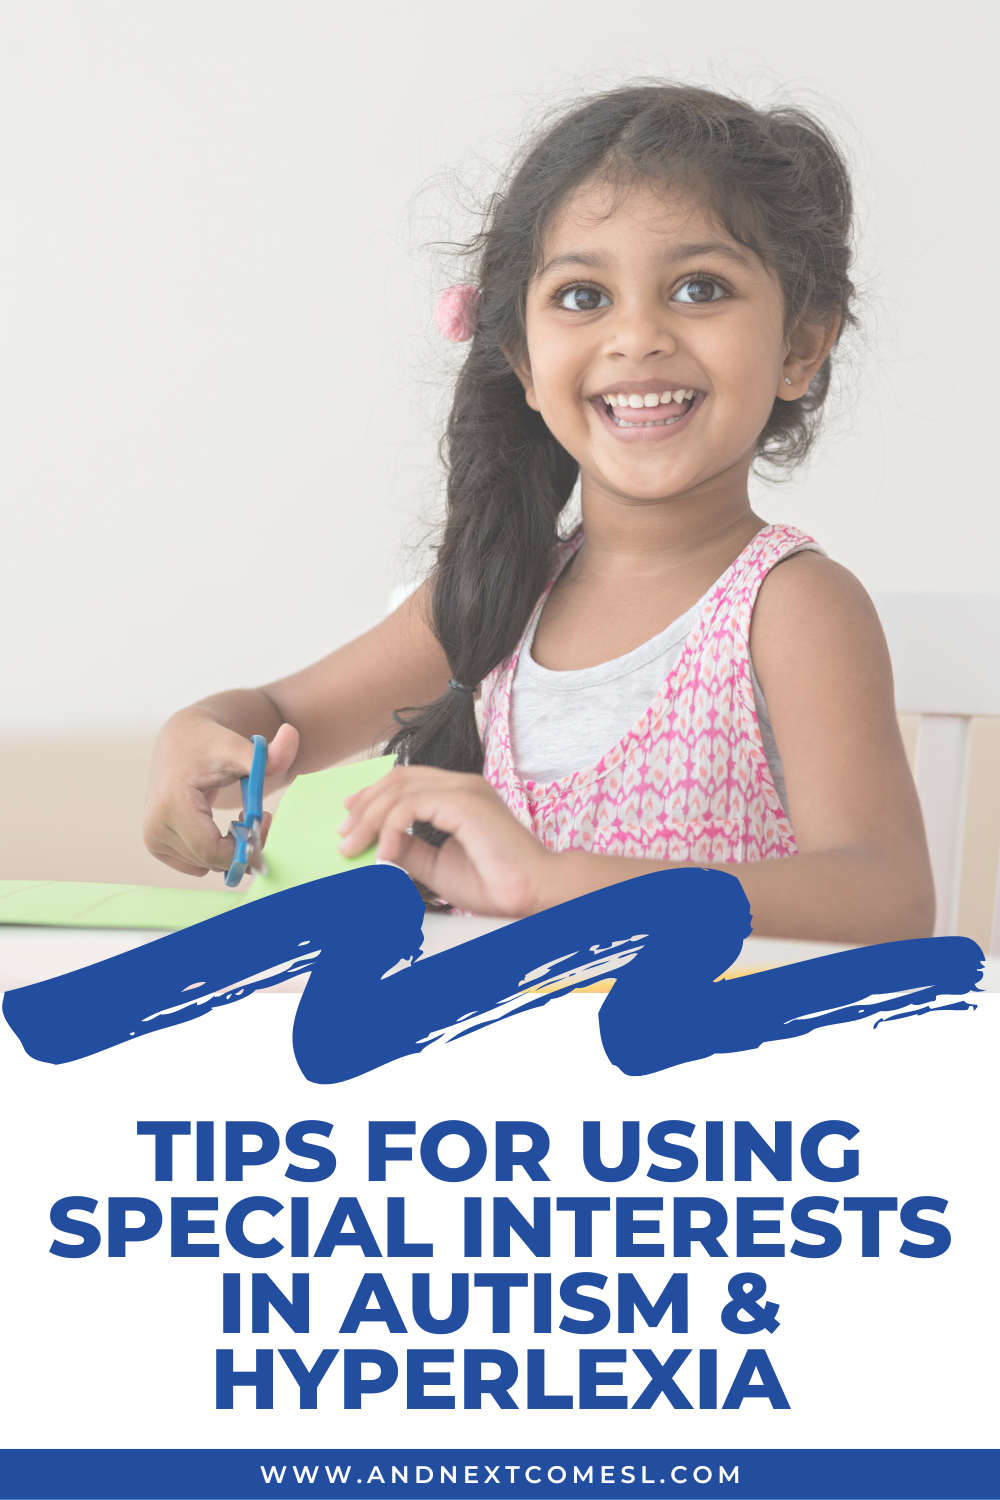 Tips for using special interests in autism and hyperlexia (as well as things you shouldn't do!)